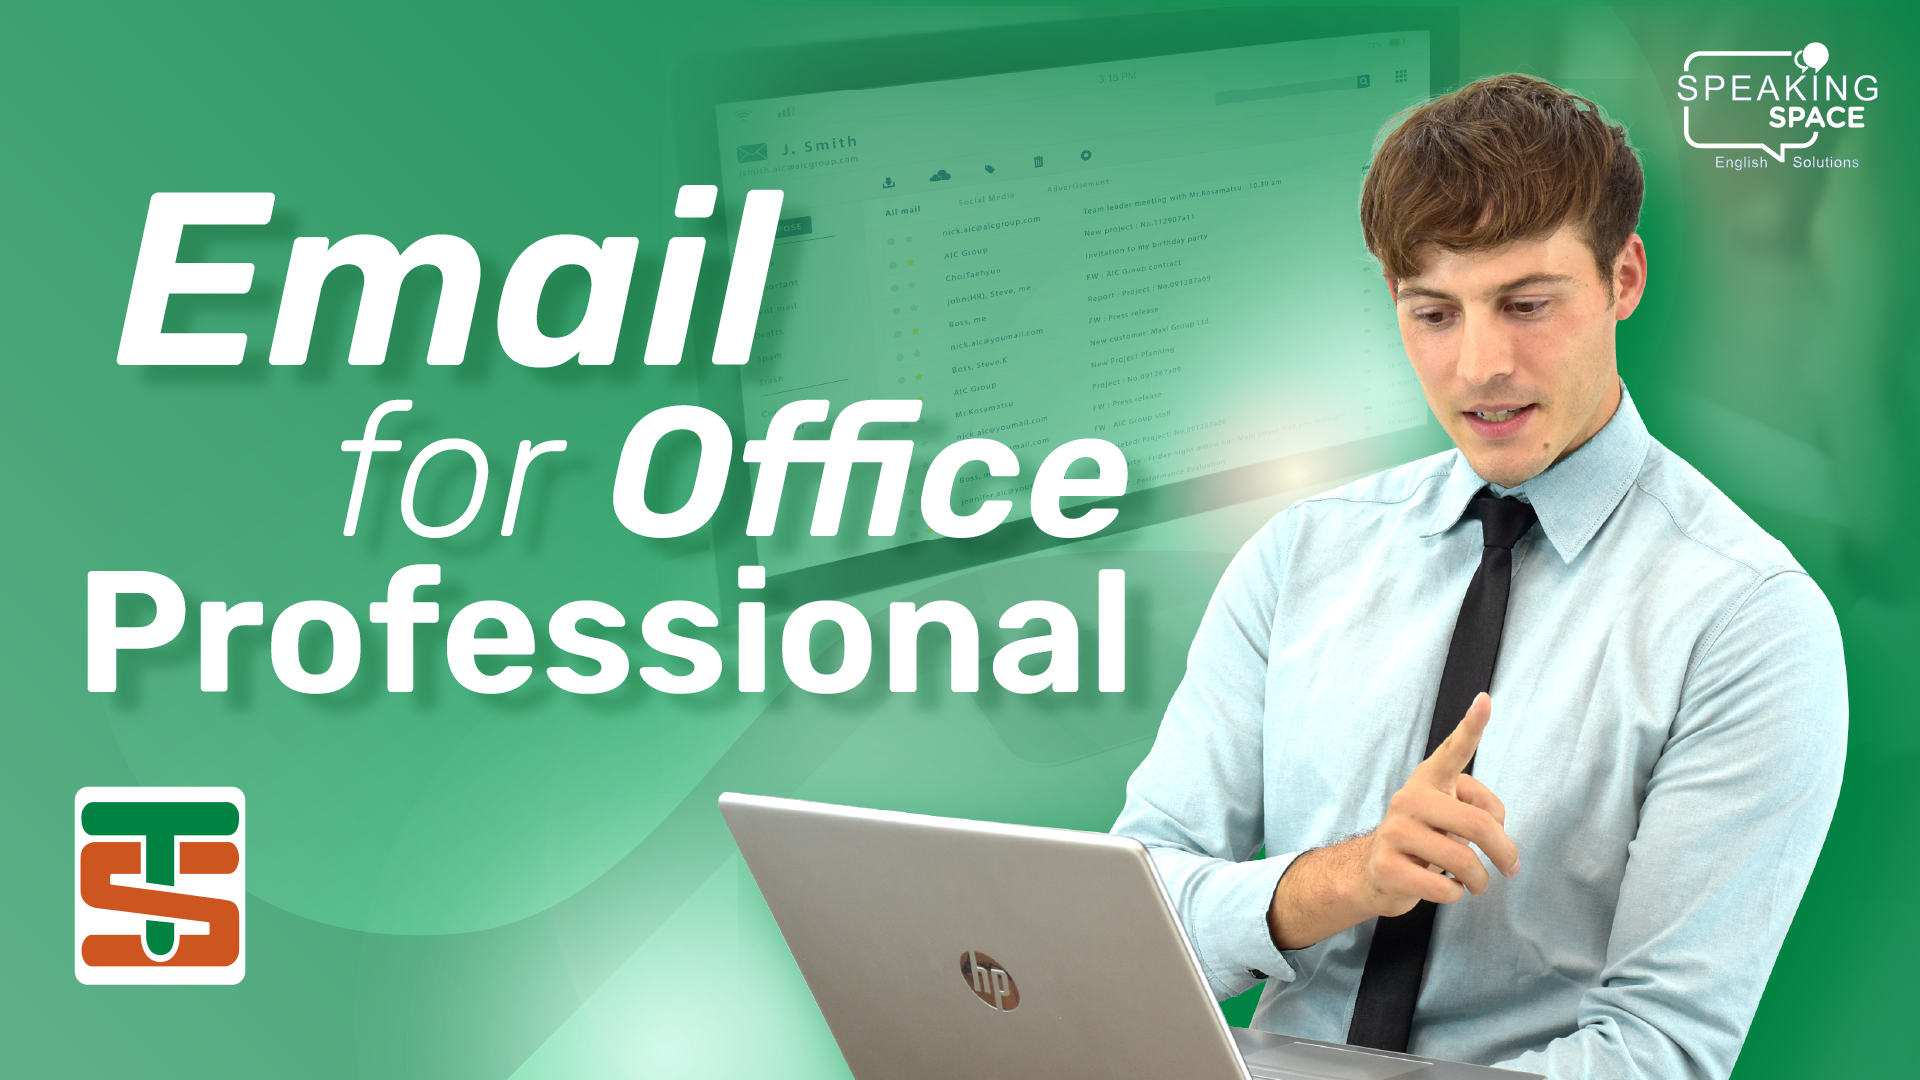 TSG รุ่น E8-E11: Email for Office Professionals